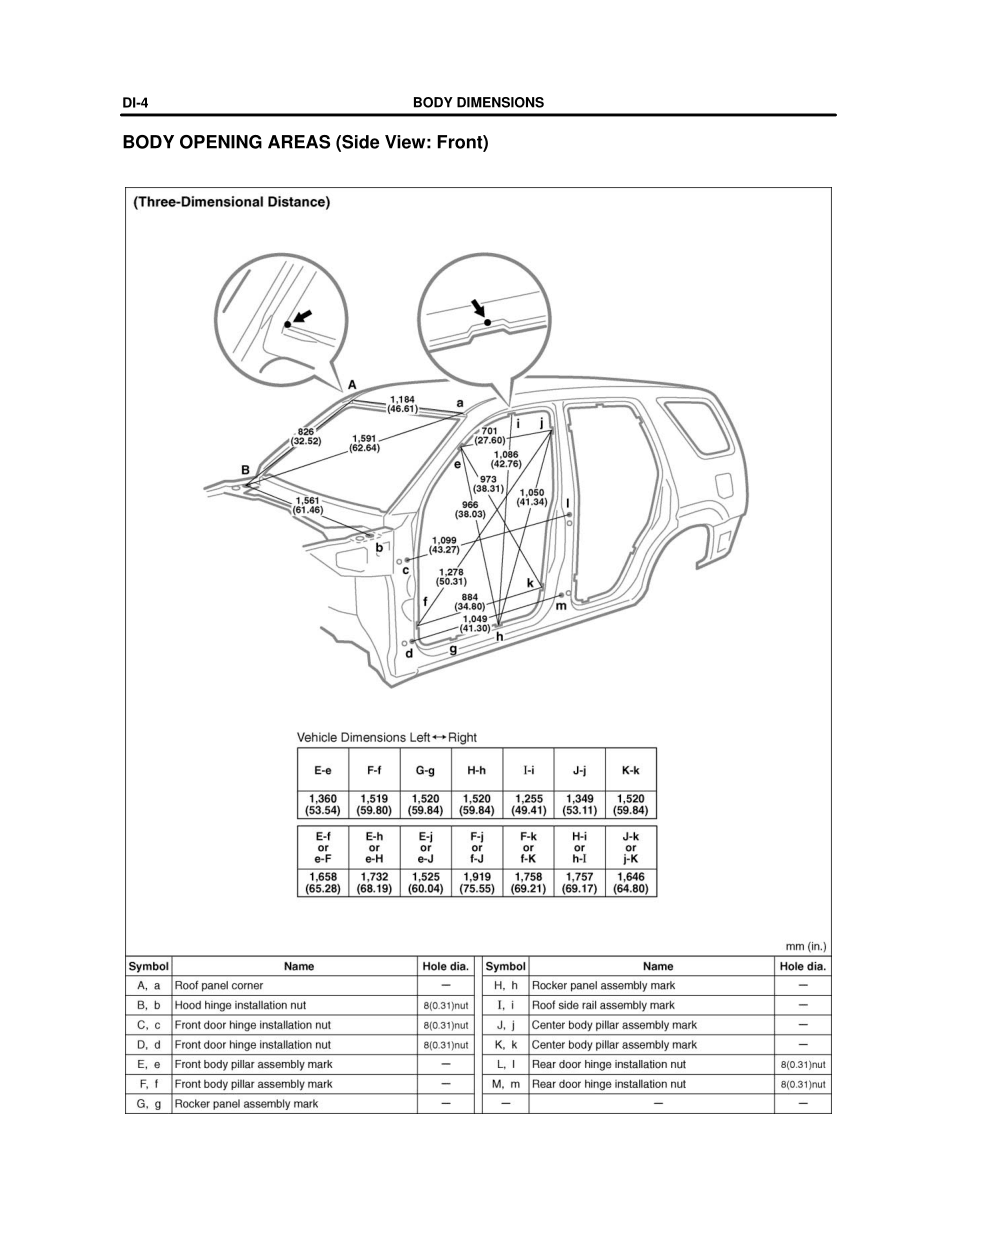 PreView of : 2003-2008 TOYOTA 4Runner Repair Manual, Body Opening Areas (Side View Front)-carownersmanuals2.com